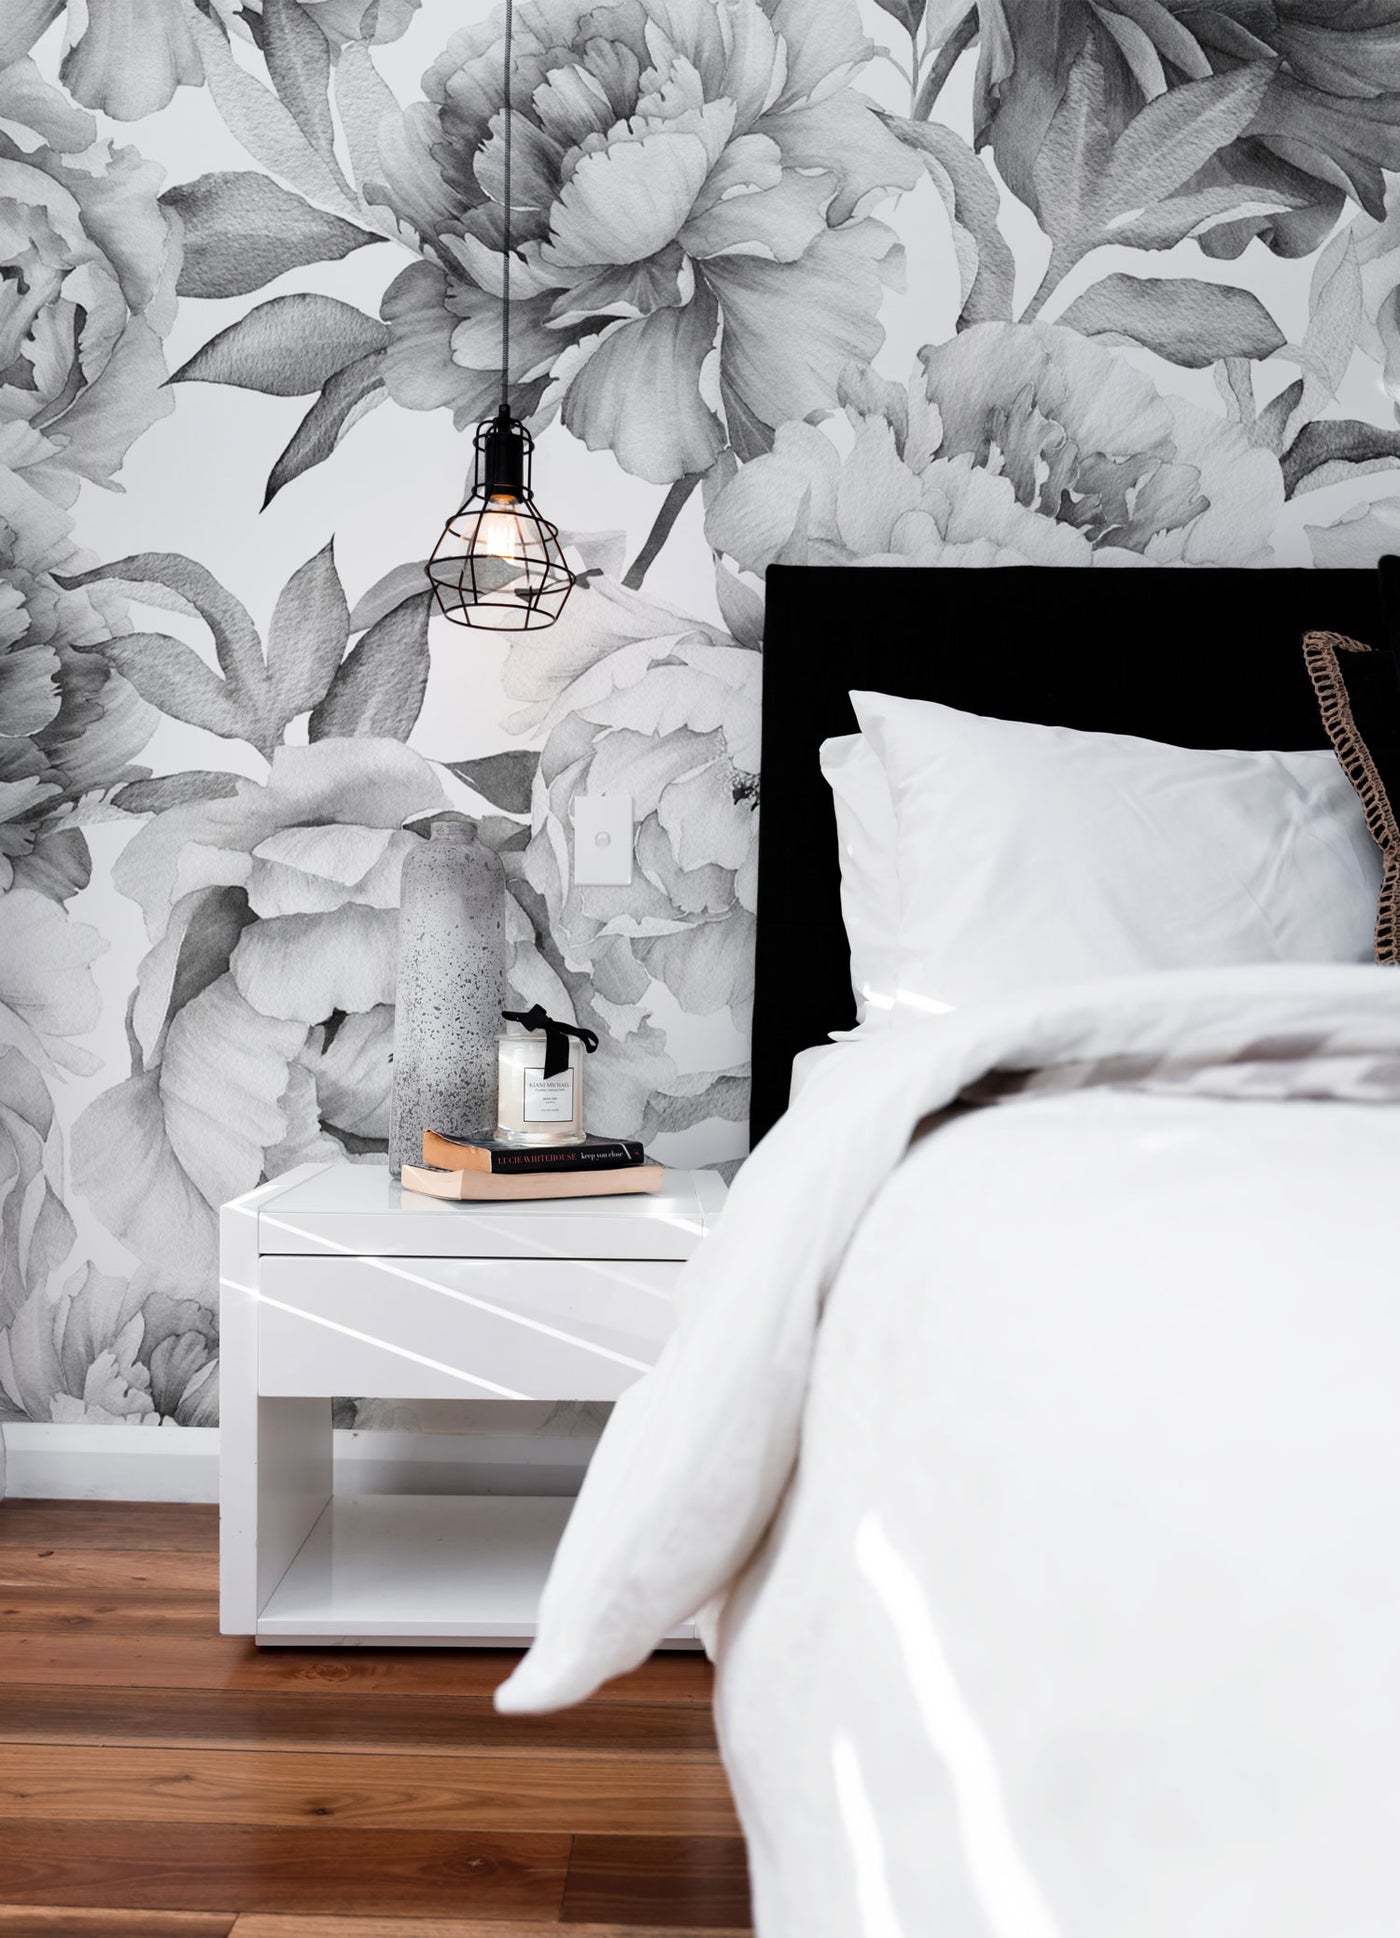 Black and white Peonies Wall Mural